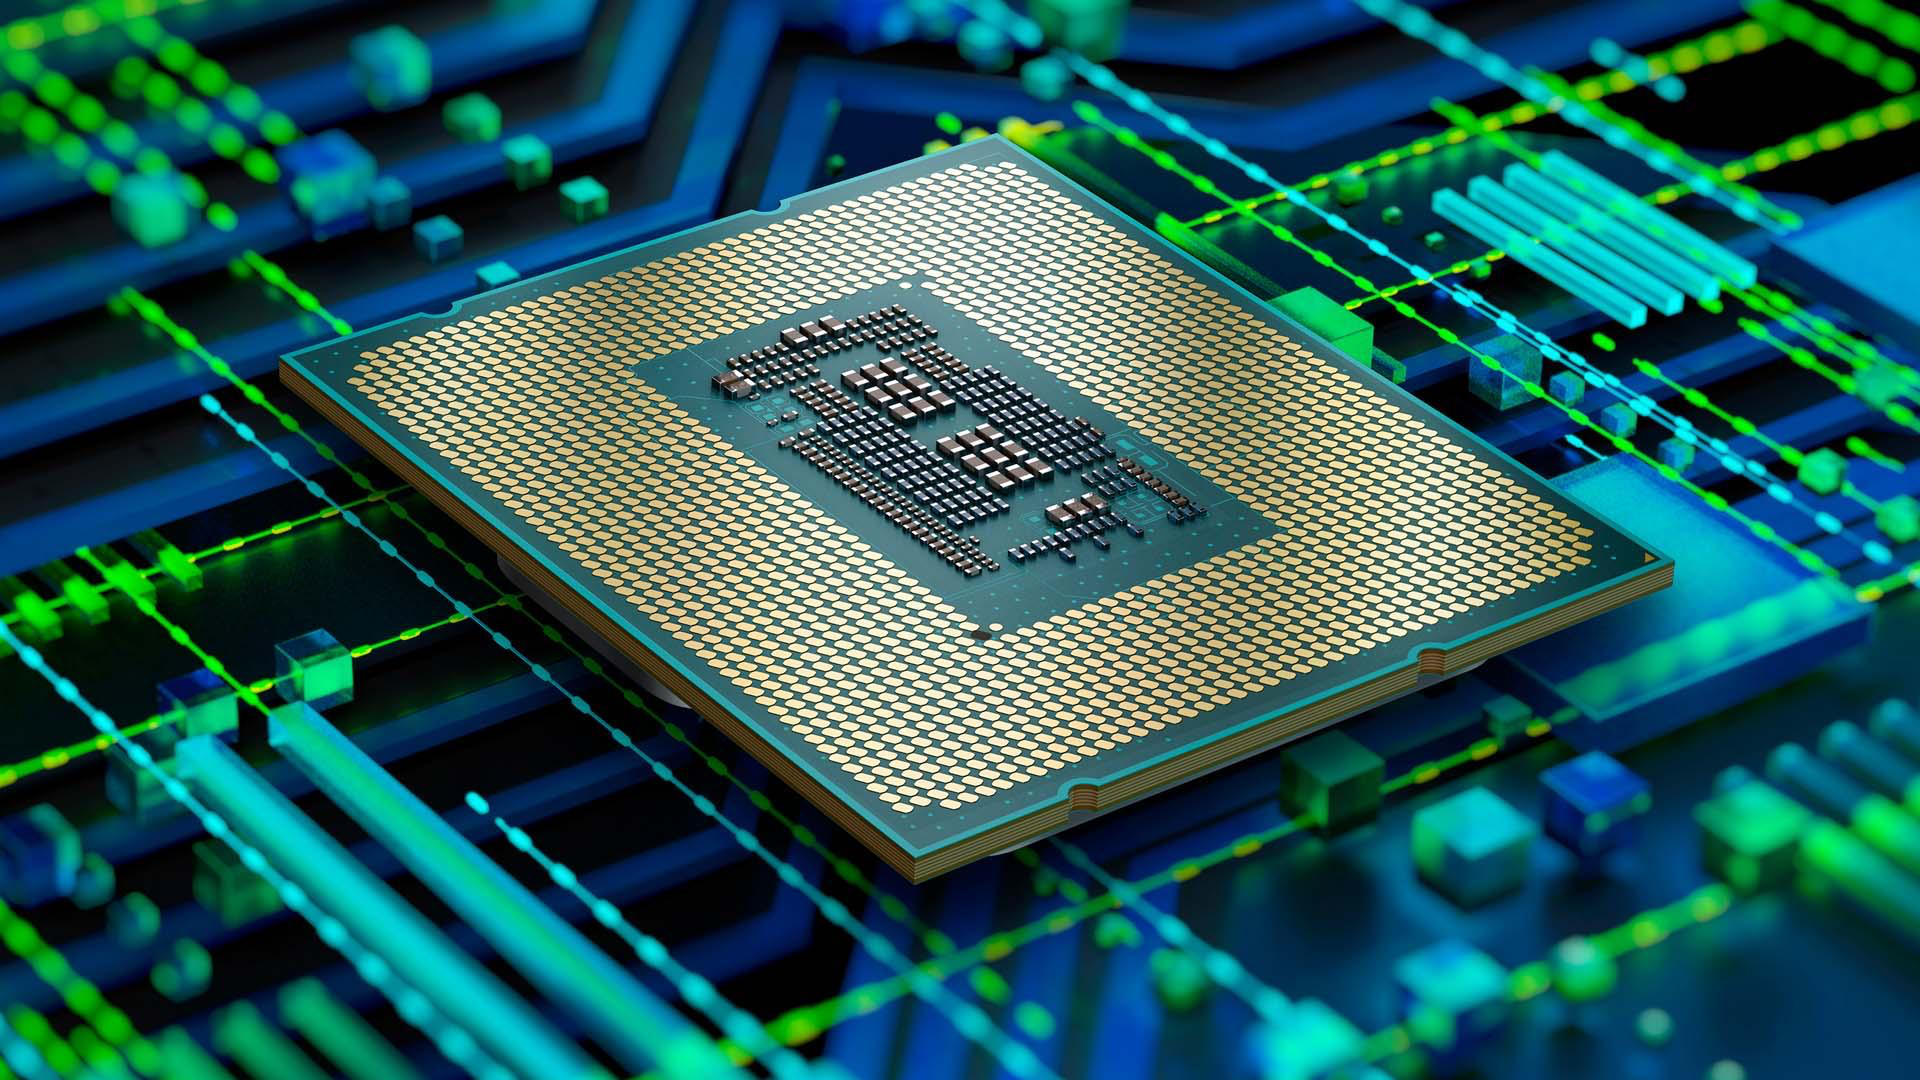 Intel Lists 16 New Vulnerabilities Related to BIOS Firmware